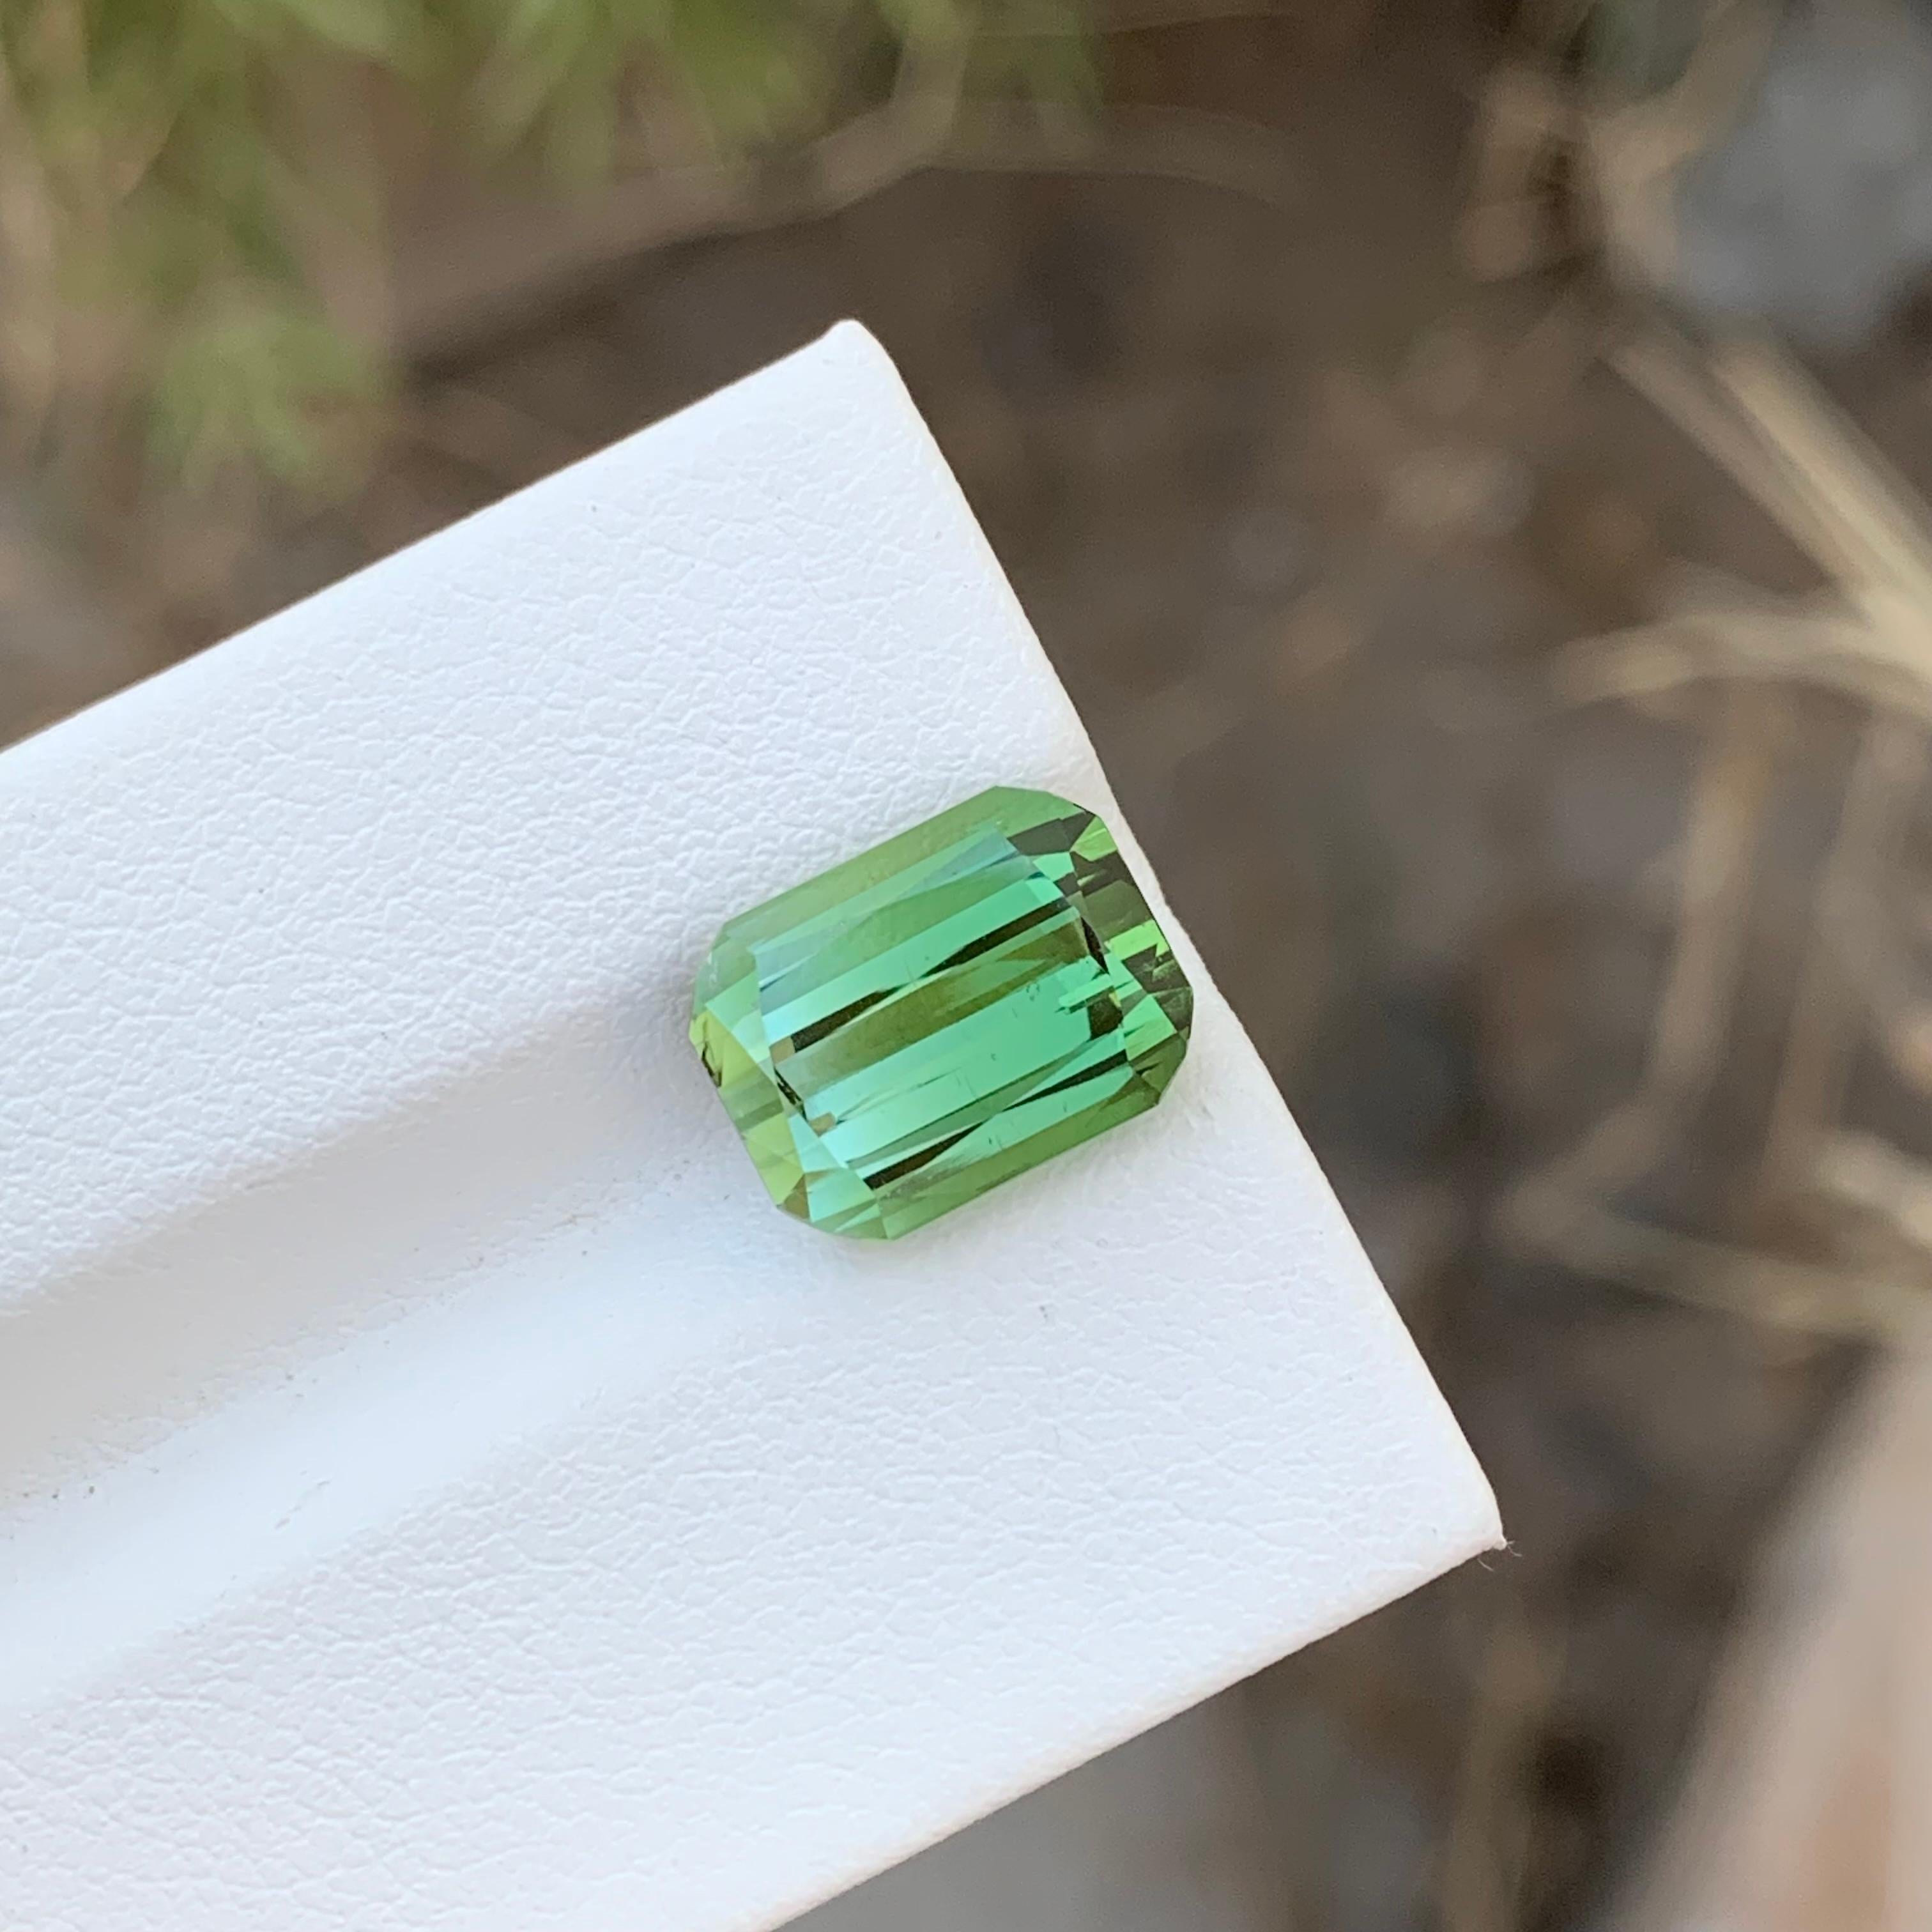 Loose Tourmaline 
Weight: 6.35 Carats 
Dimension: 11.3x8.7x7.3 Mm
Origin: Kunar Afghanistan 
Shape: Cushion
Color: Green & Mint
Treatment: Non
Certificate: On Demand 
Green Mint Bicolor Tourmaline is a captivating gemstone renowned for its stunning